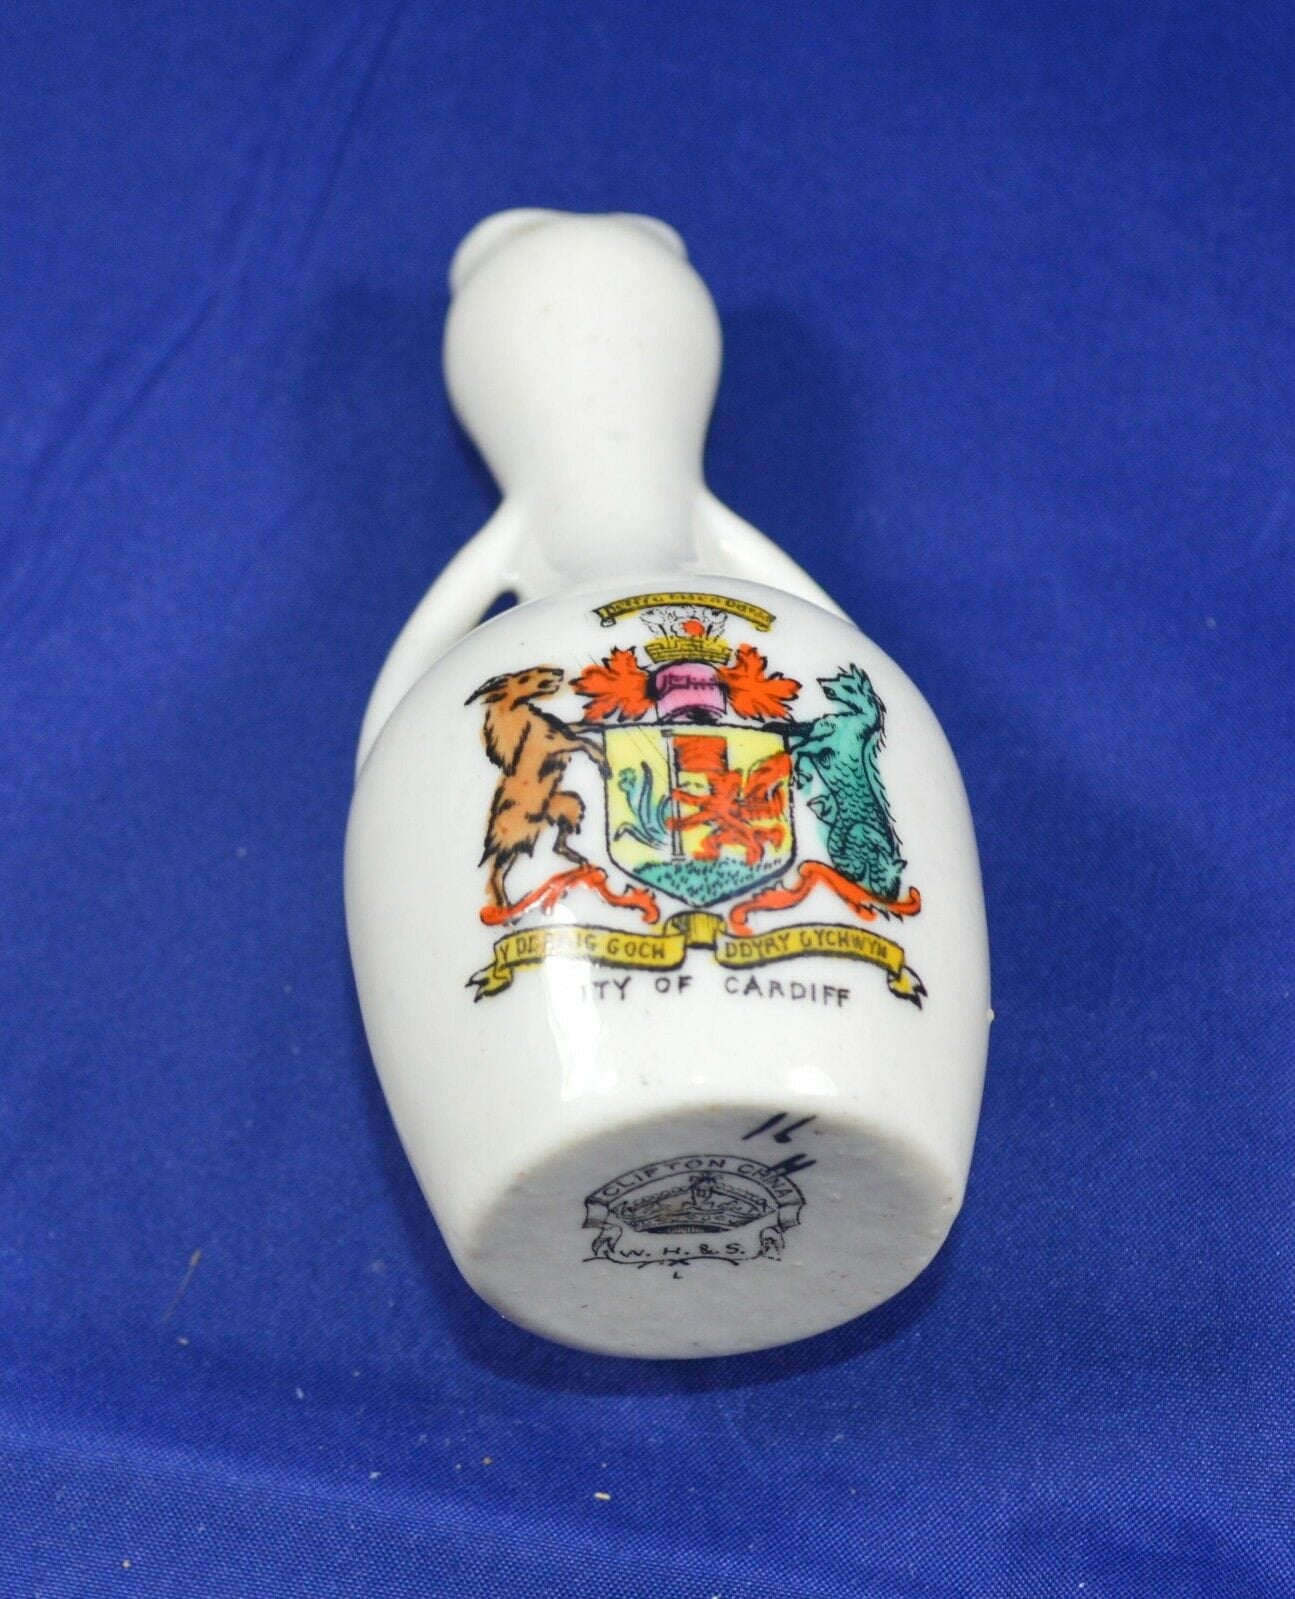 CLIFTON CHINA CRESTED WARE TWO HANDLED VASE TULIP STYLE OPENING CITY OF CARDIFF(PREVIOUSLY OWNED) - TMD167207